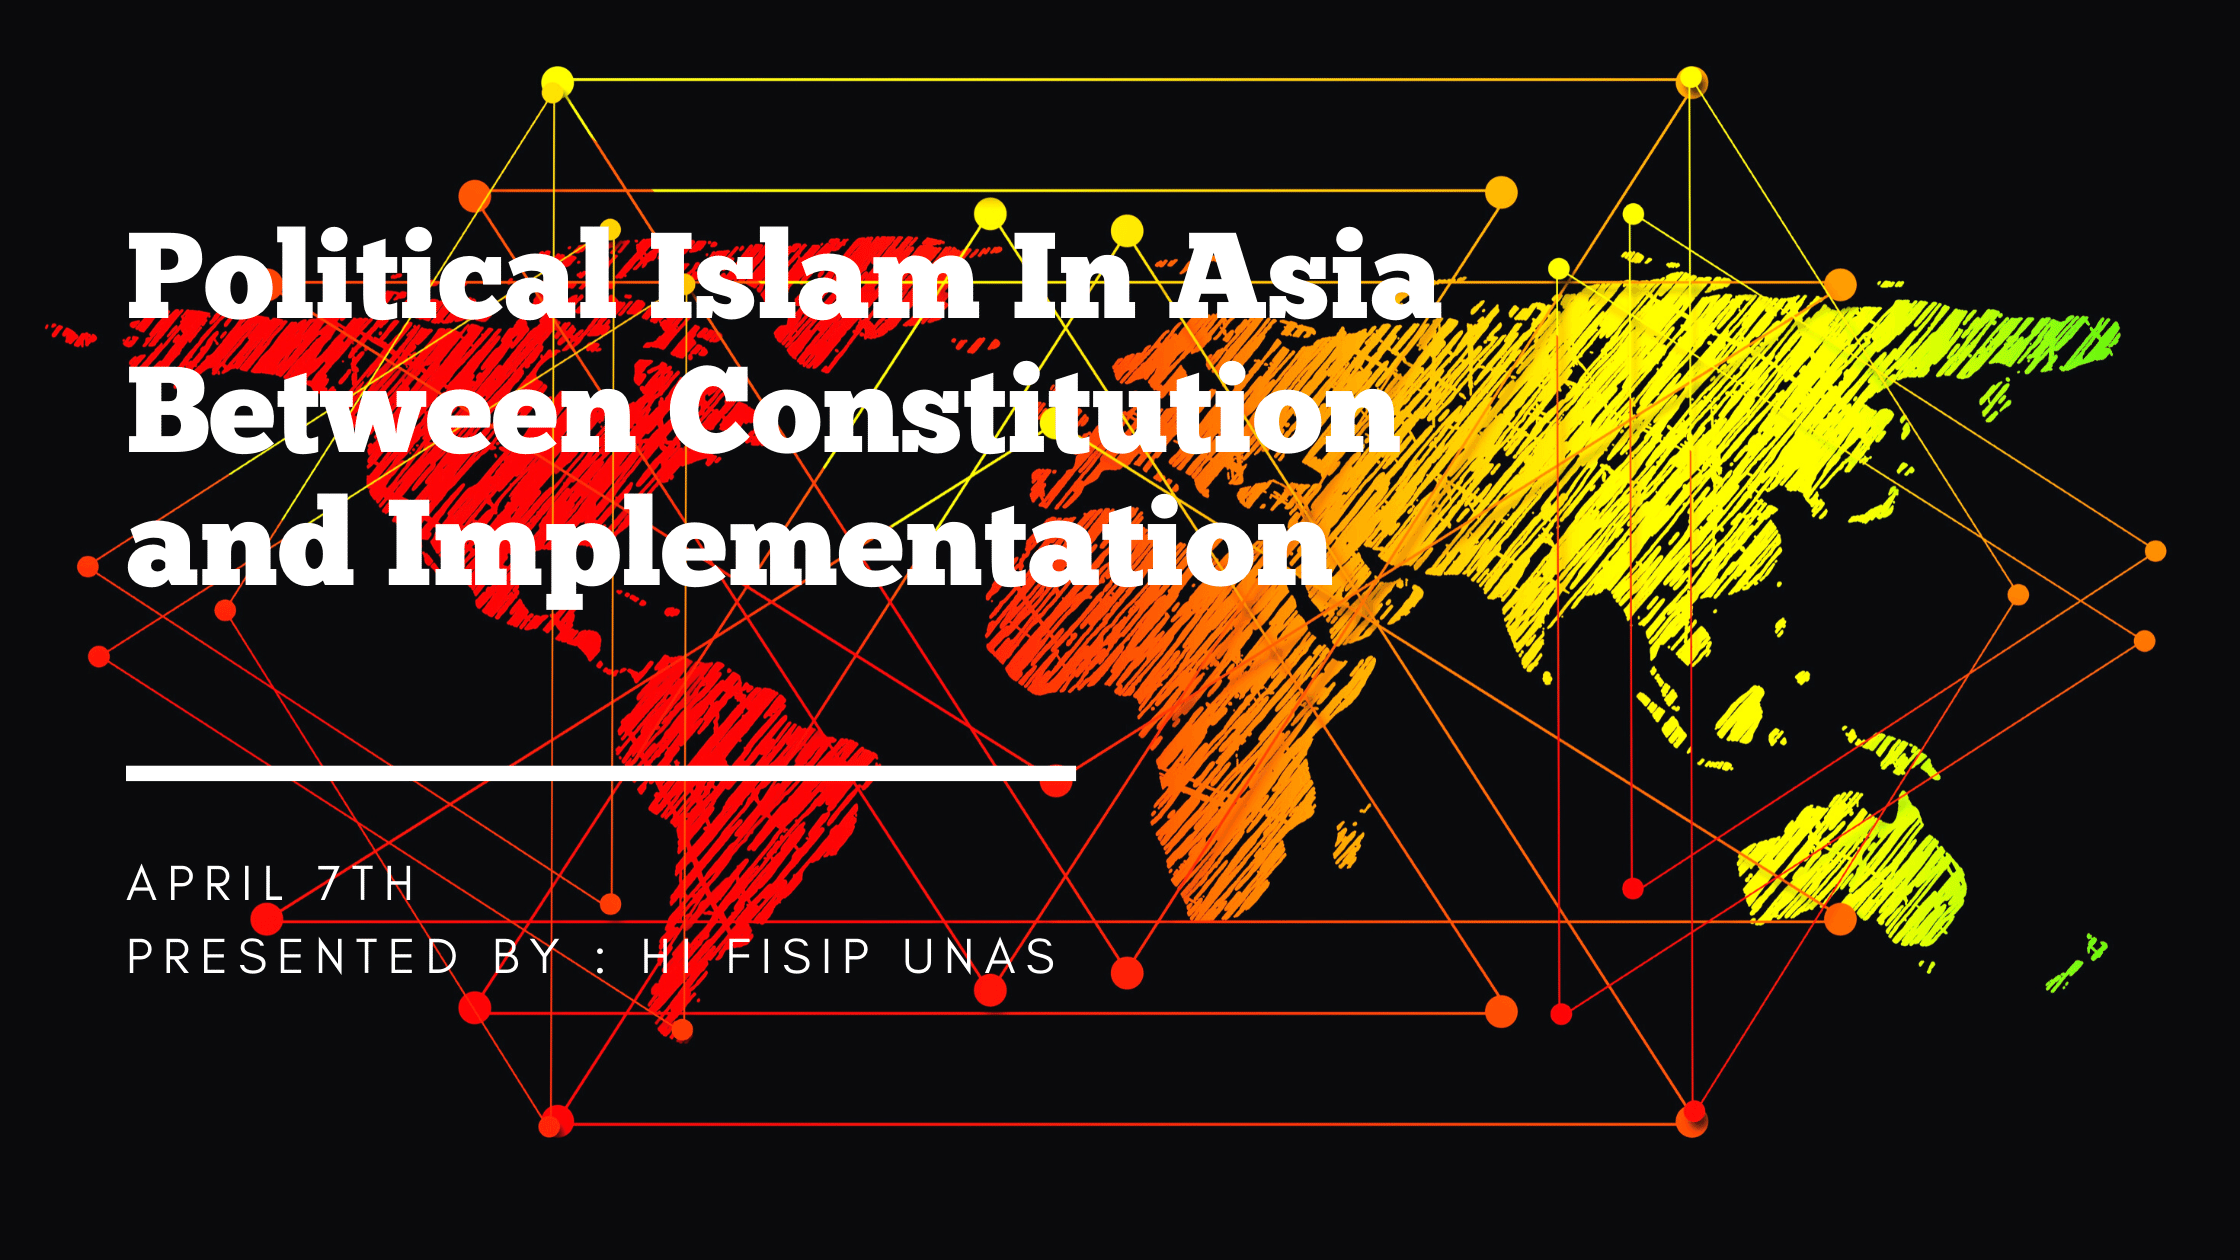 International Webinar “Political Islam In Asia Between Constitution and Implementation”